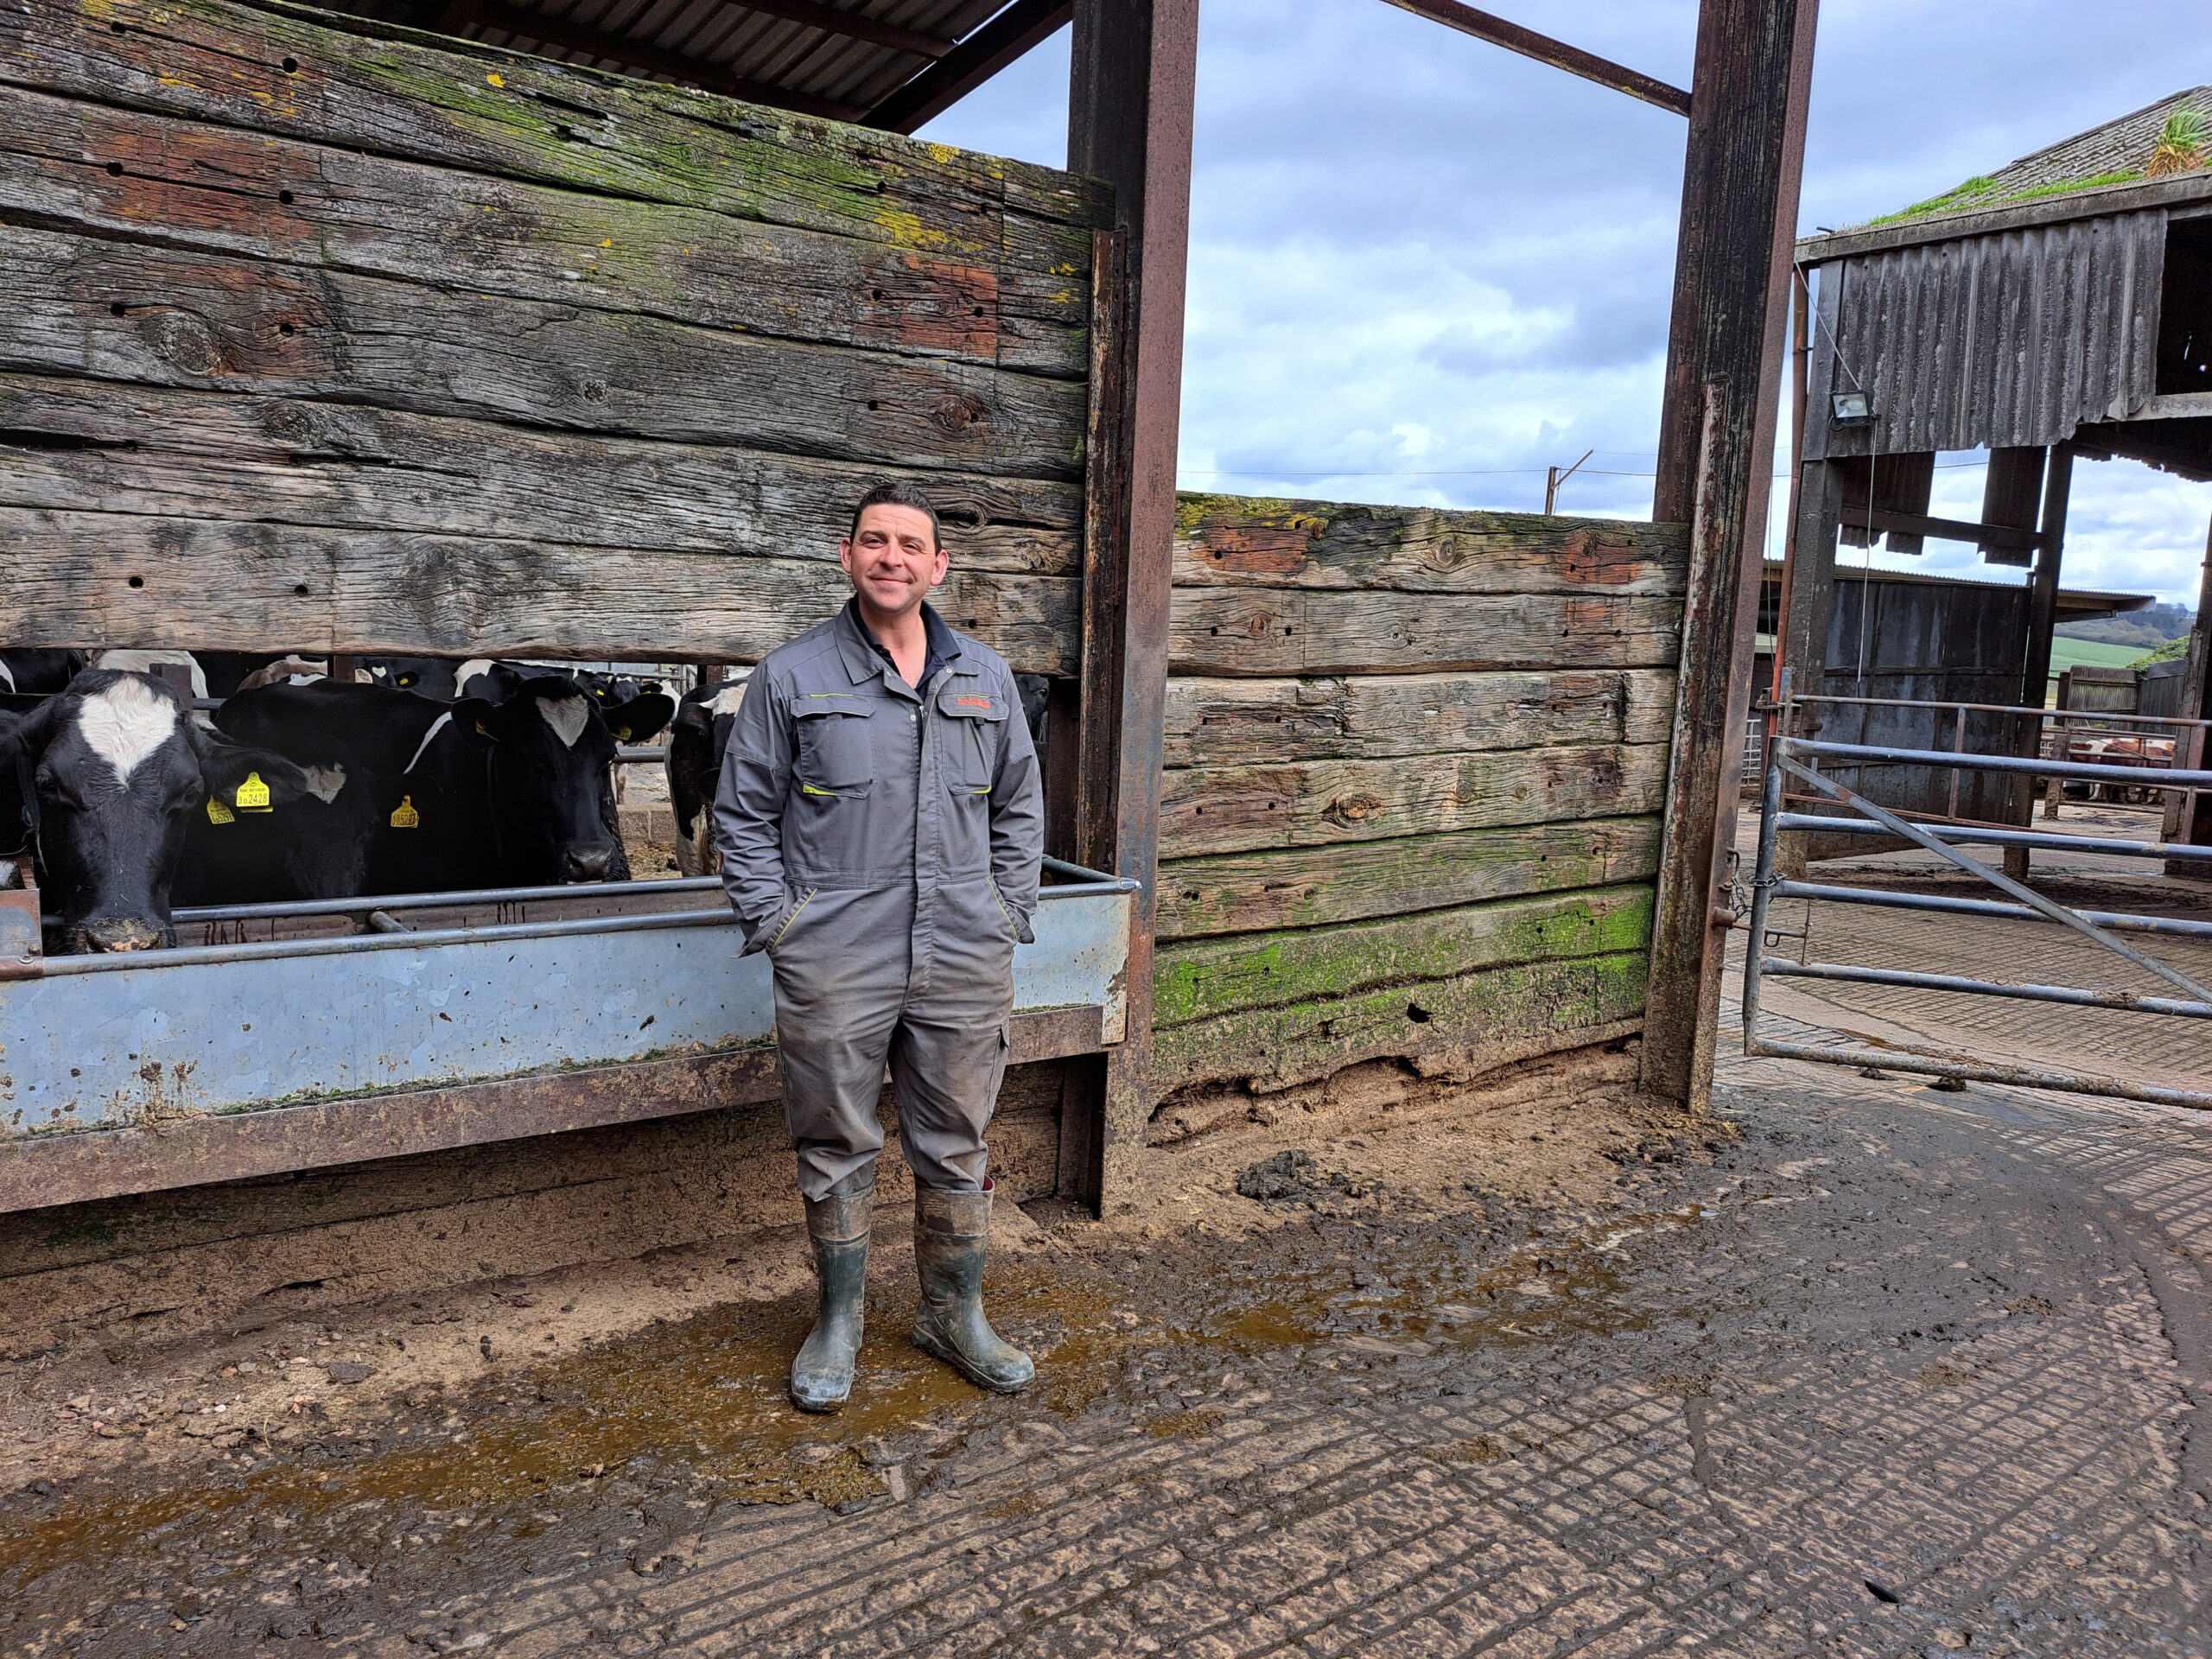 Formashield – a natural solution for SCCs working well for Keepers Lodge Farm.